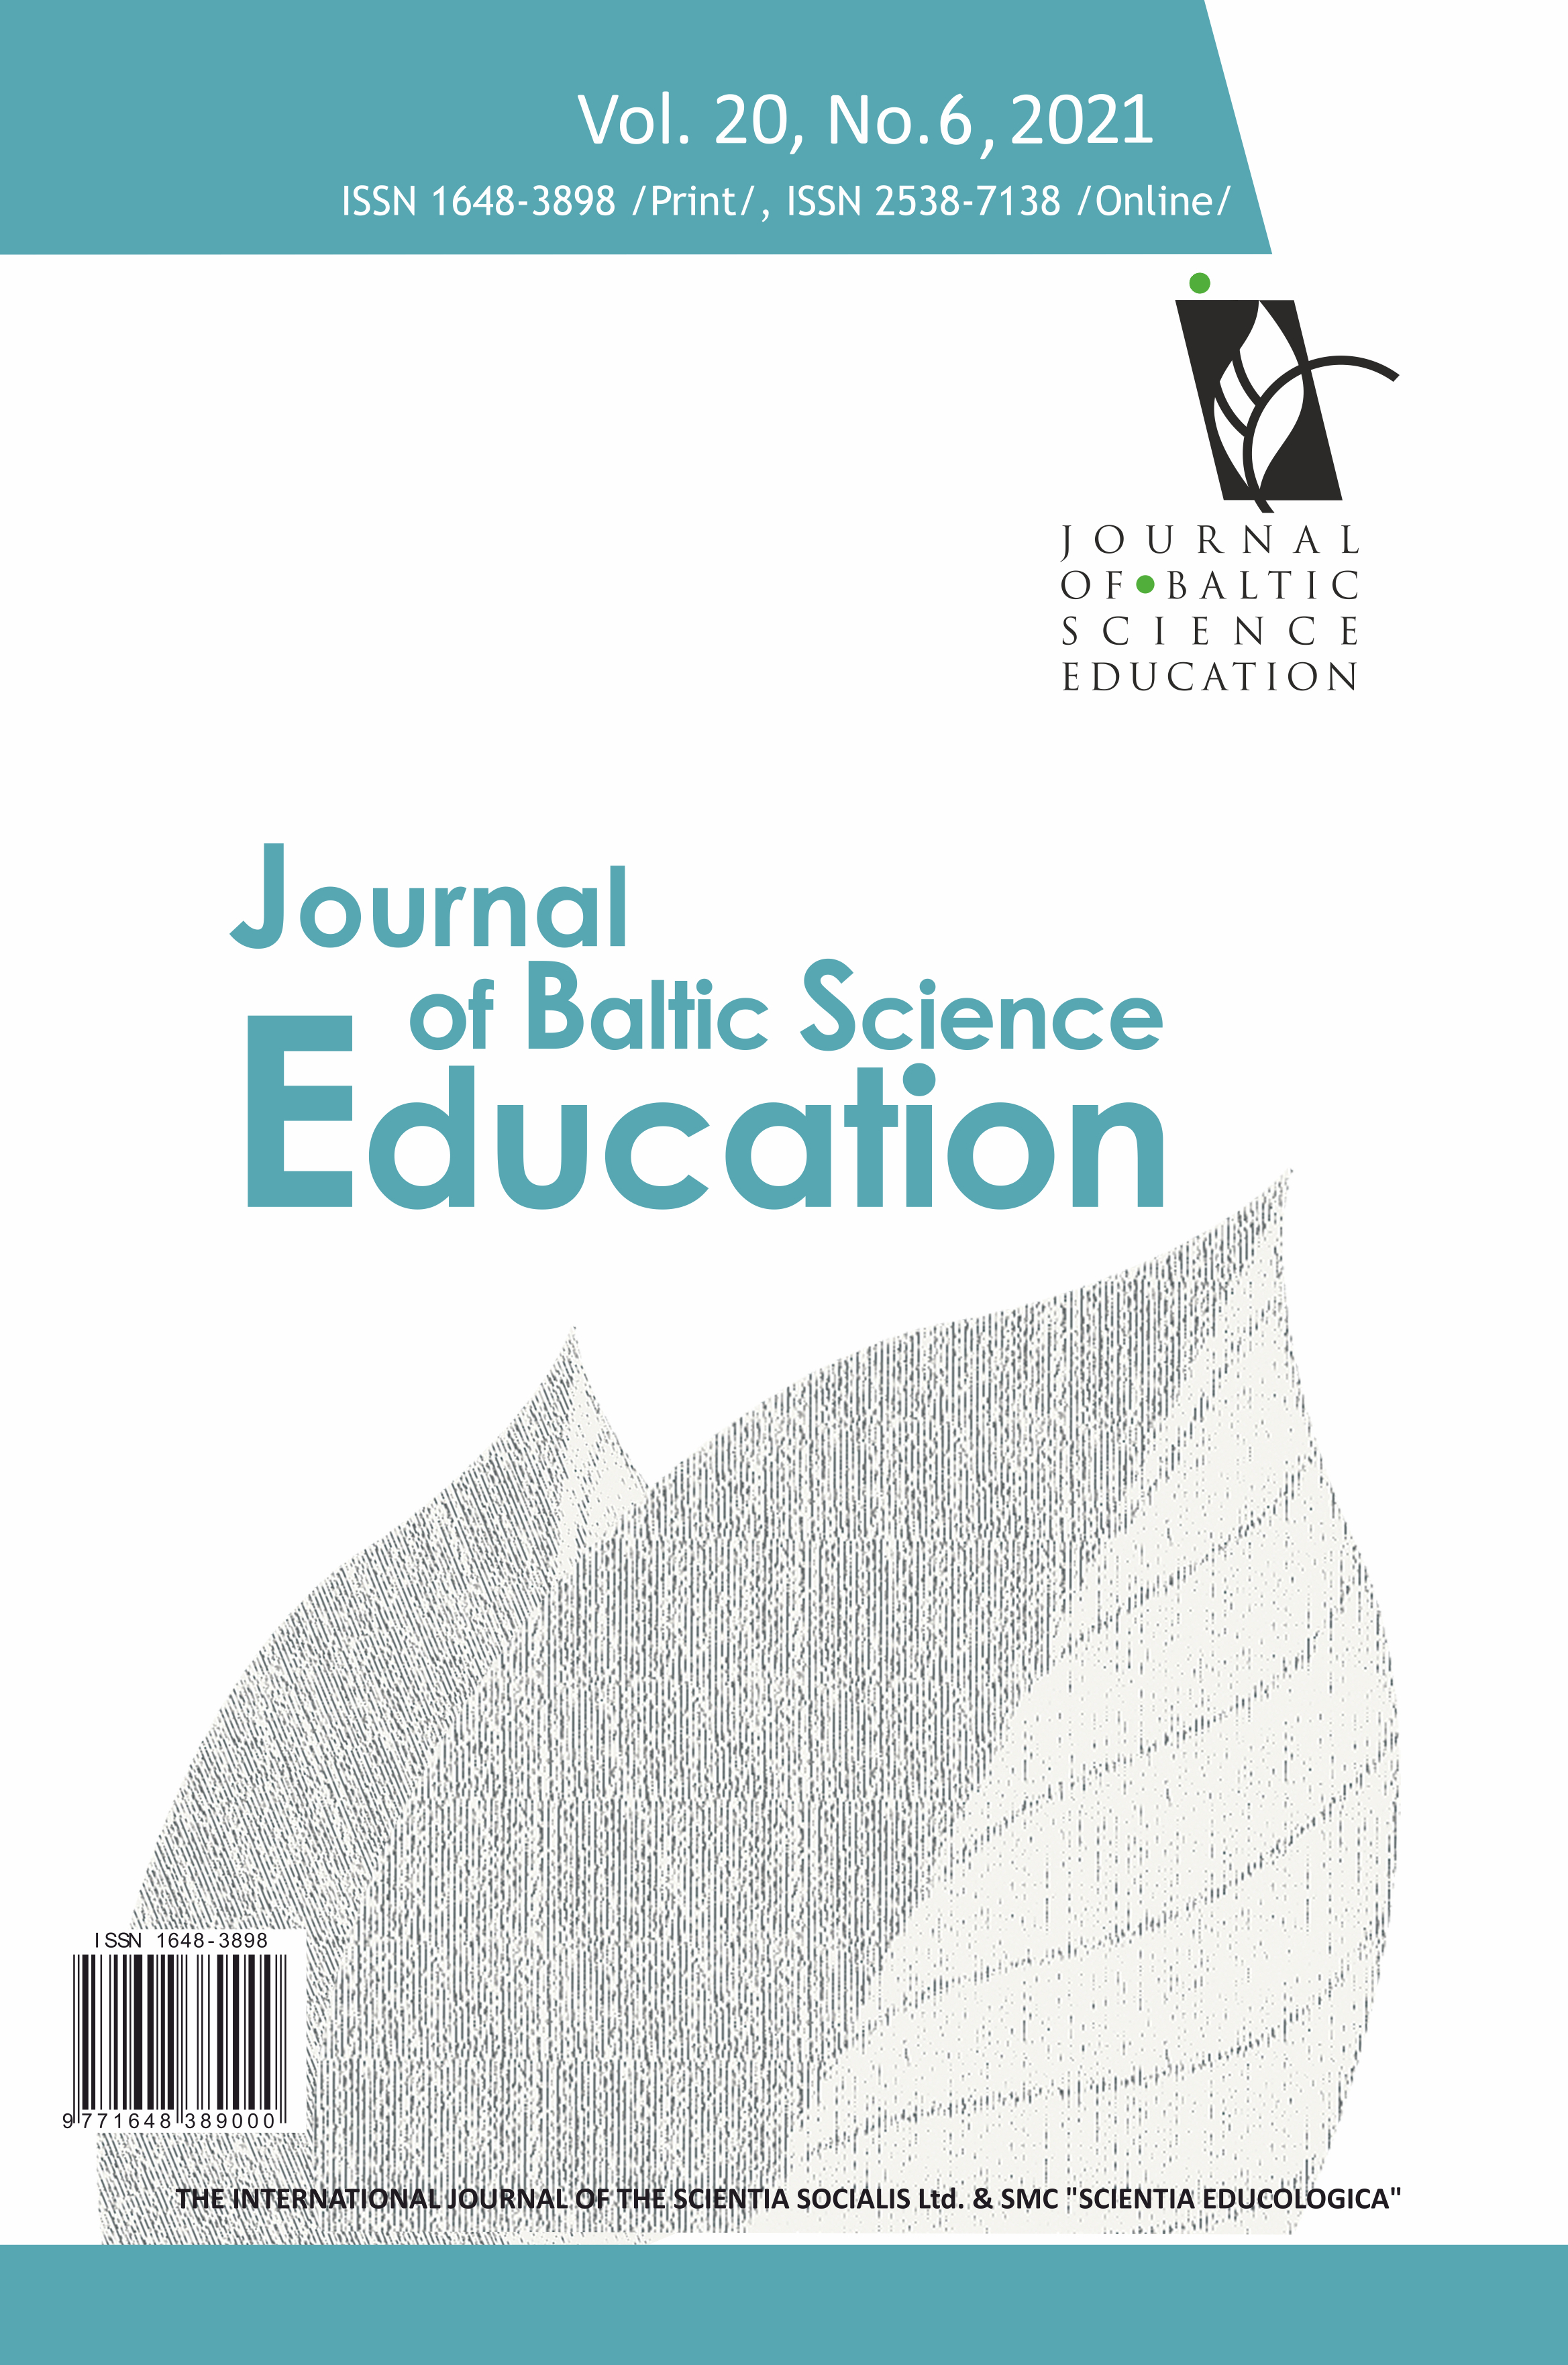 THE EFFECT OF REACT STRATEGY ON ACHIEVEMENT IN SCIENCE EDUCATION: A MIXED RESEARCH SYNTHESIS Cover Image